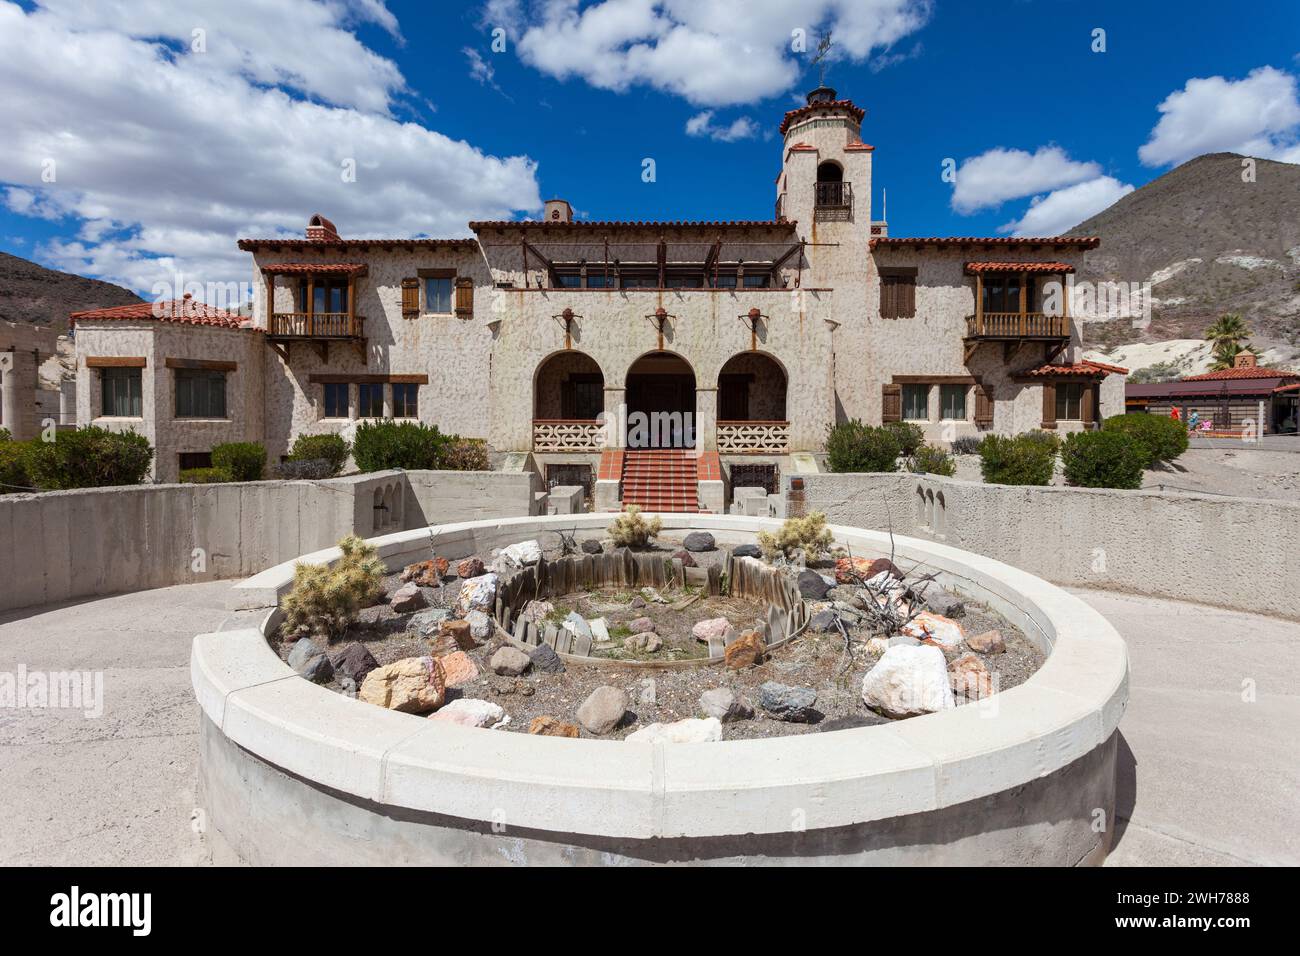 Death Valley Ranch or Scotty's Castle, an historic mansion in Death Valley National Park in the Mojave Desert, California. Stock Photo